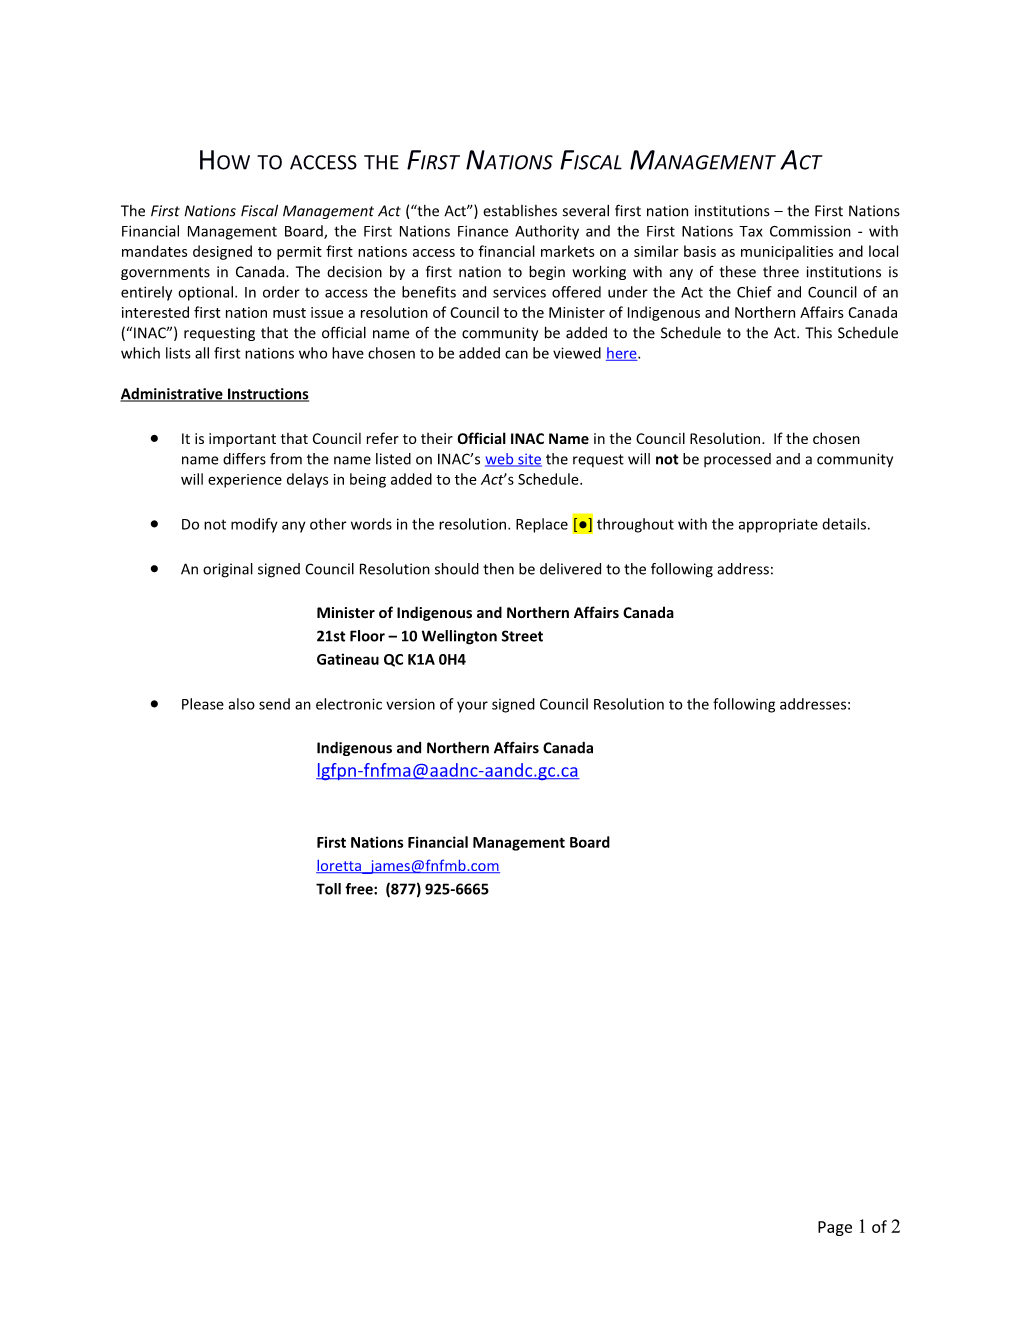 How to Access the First Nations Fiscal Management Act